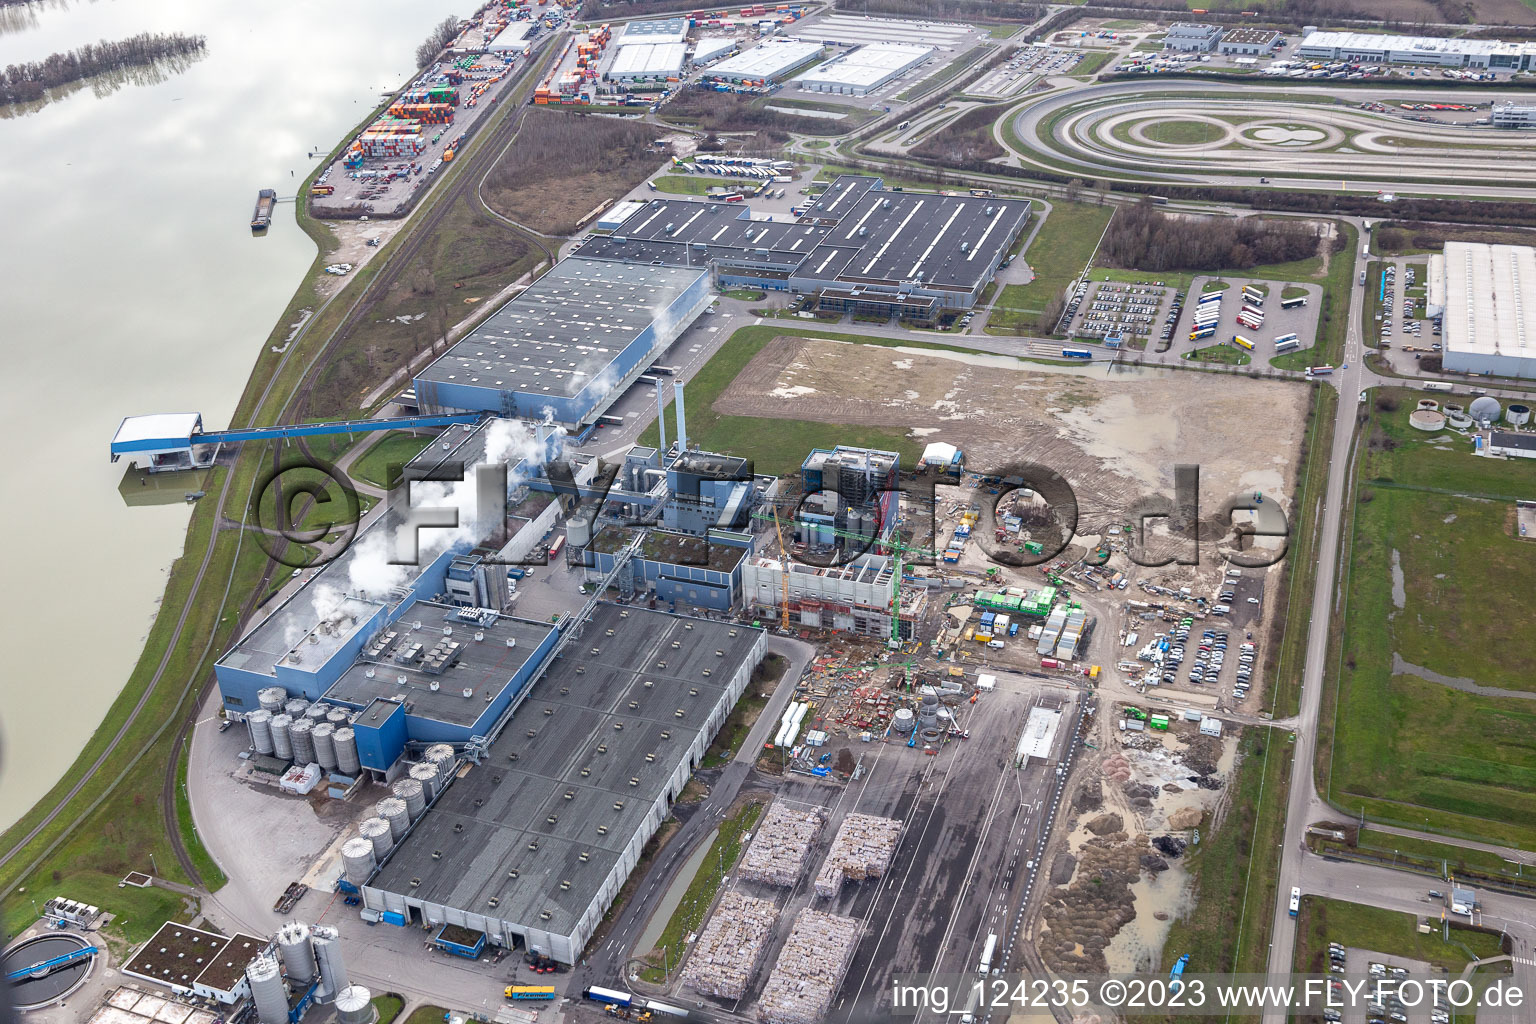 Construction of the new gas- hydrogen-power plant at paer mill Papierfabrik Palm GmbH & Co. KG in the district Industriegebiet Woerth-Oberwald in Woerth am Rhein in the state Rhineland-Palatinate viewn from the air